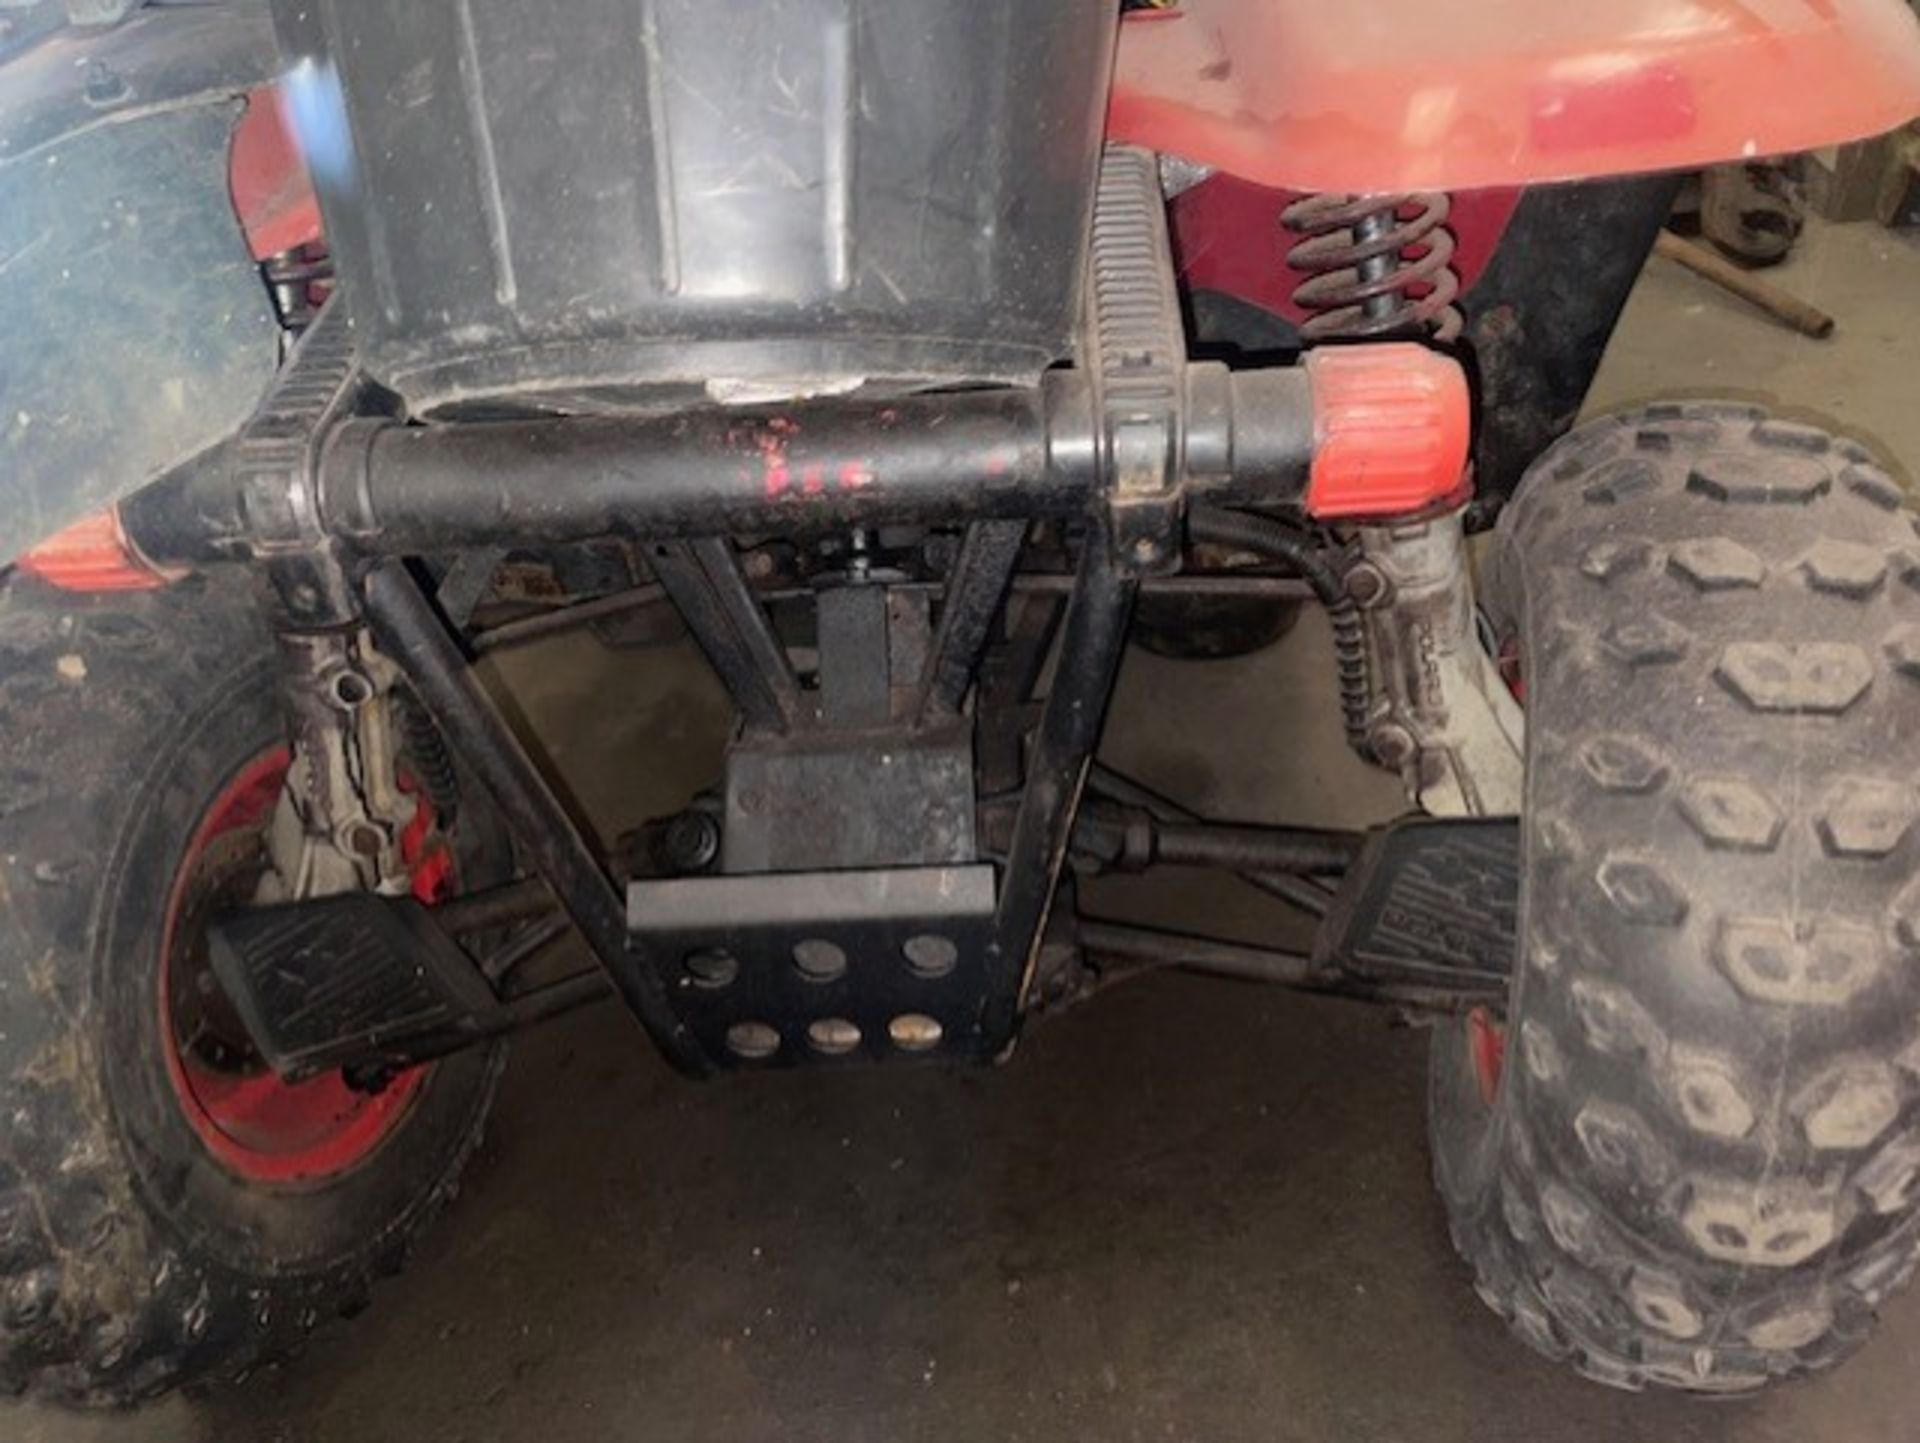 Polaris 250 2 stroke quad bike in bits as it needs a piston storey is I bought a piston but the - Image 6 of 8